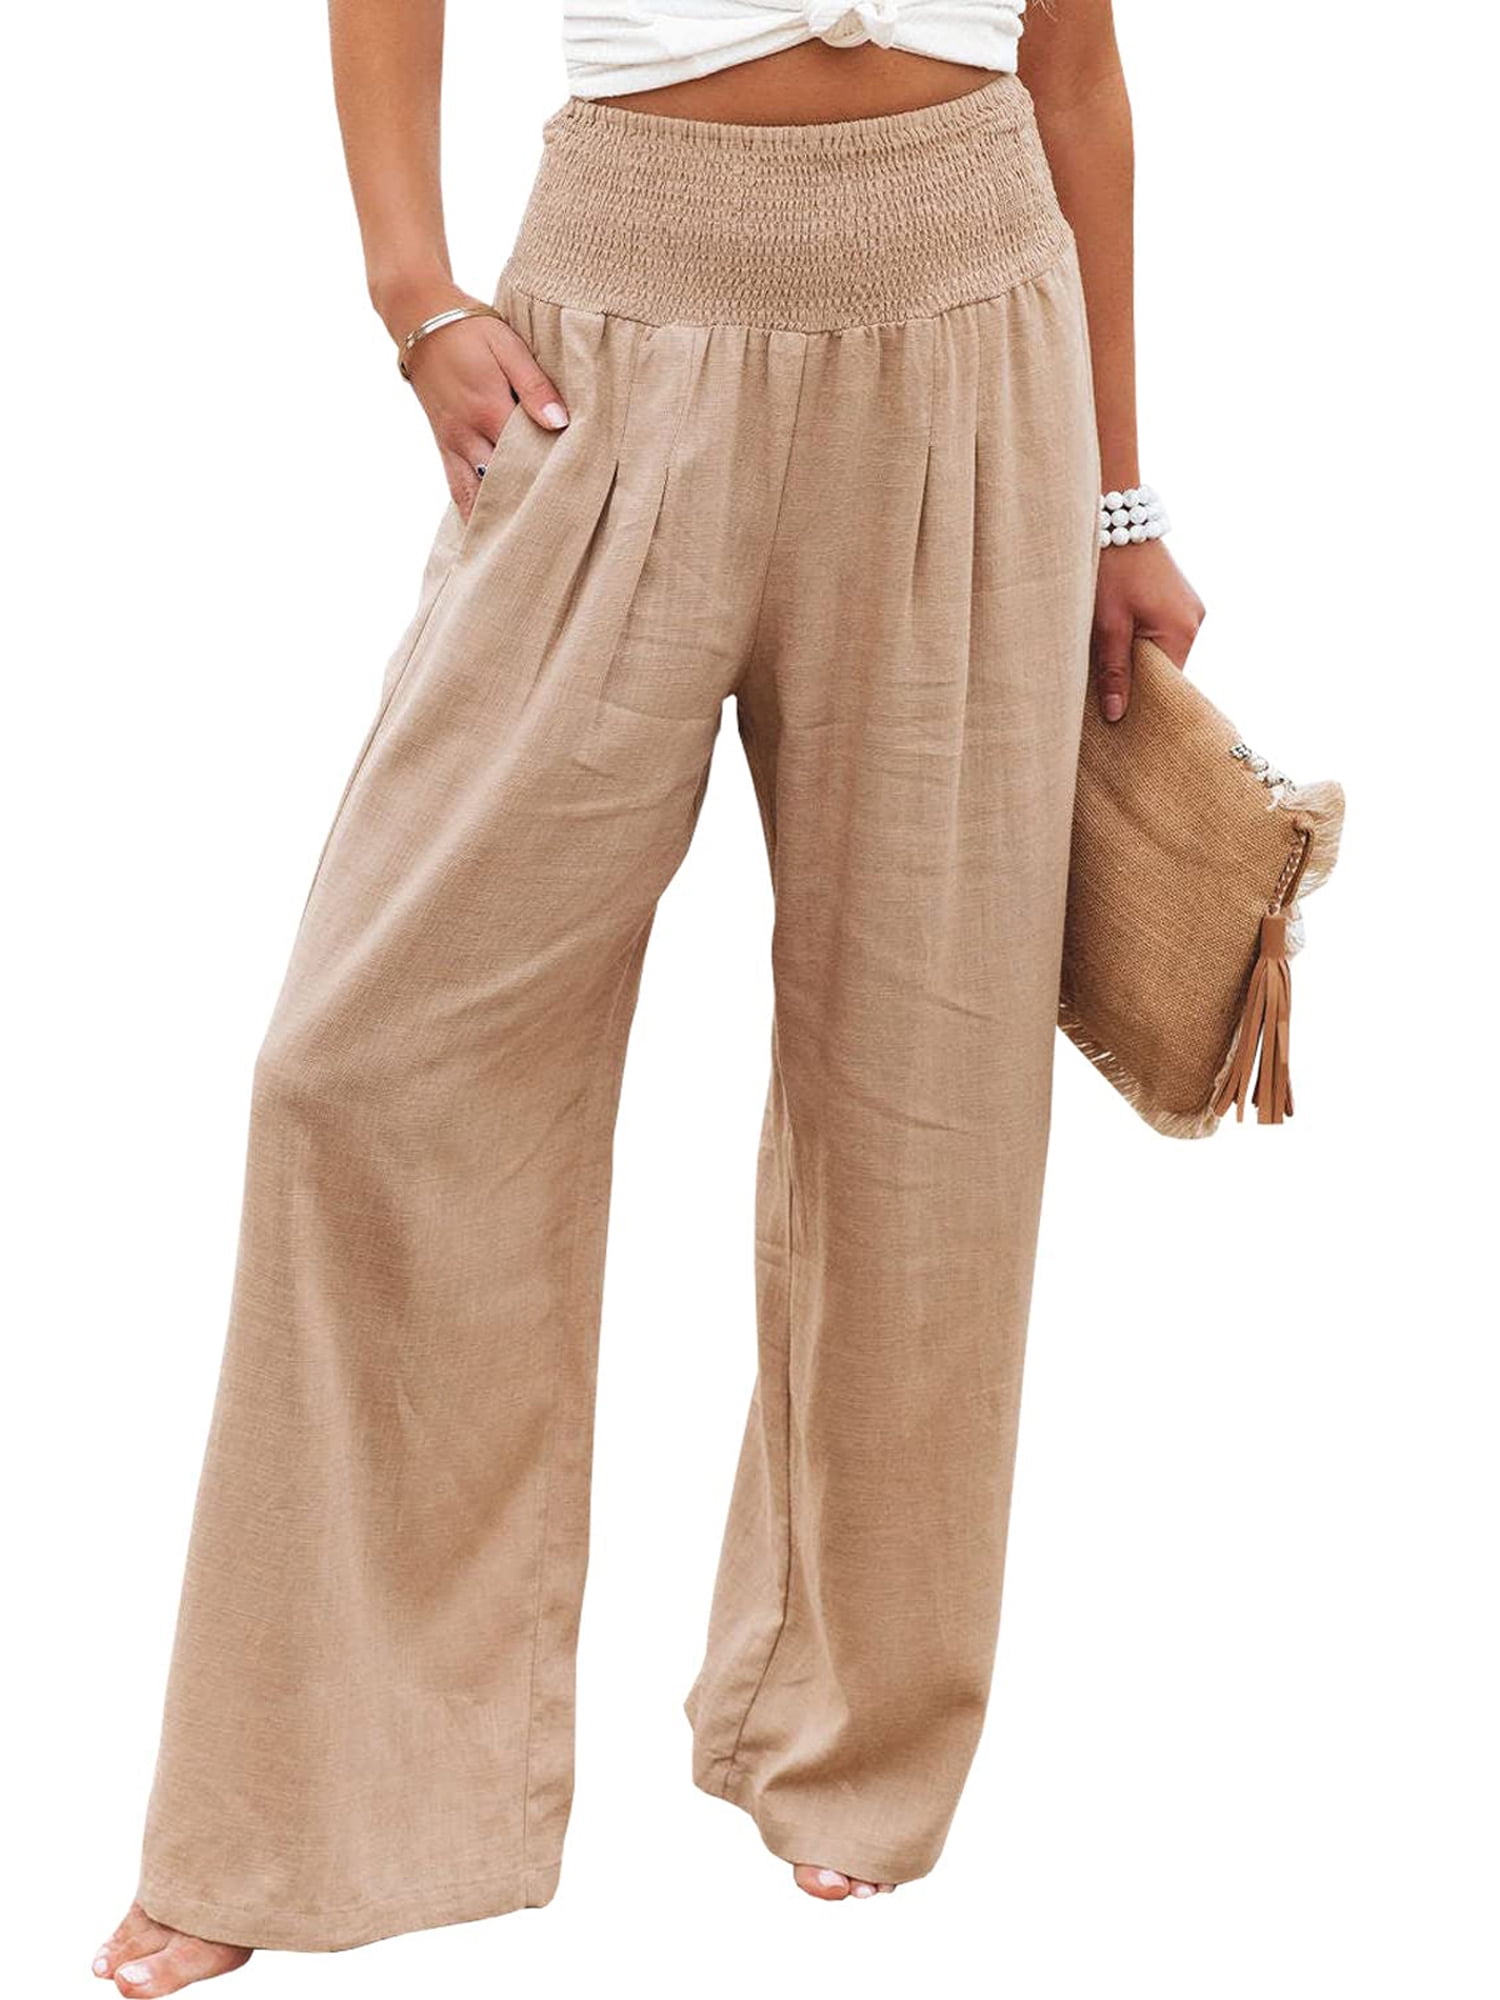 Dropship Solid Cotton Linen Women's Pants Drawstring Loose Casual Women  Pant 2021 Summer Autumn Pocket High Waist Trousers For Female to Sell  Online at a Lower Price